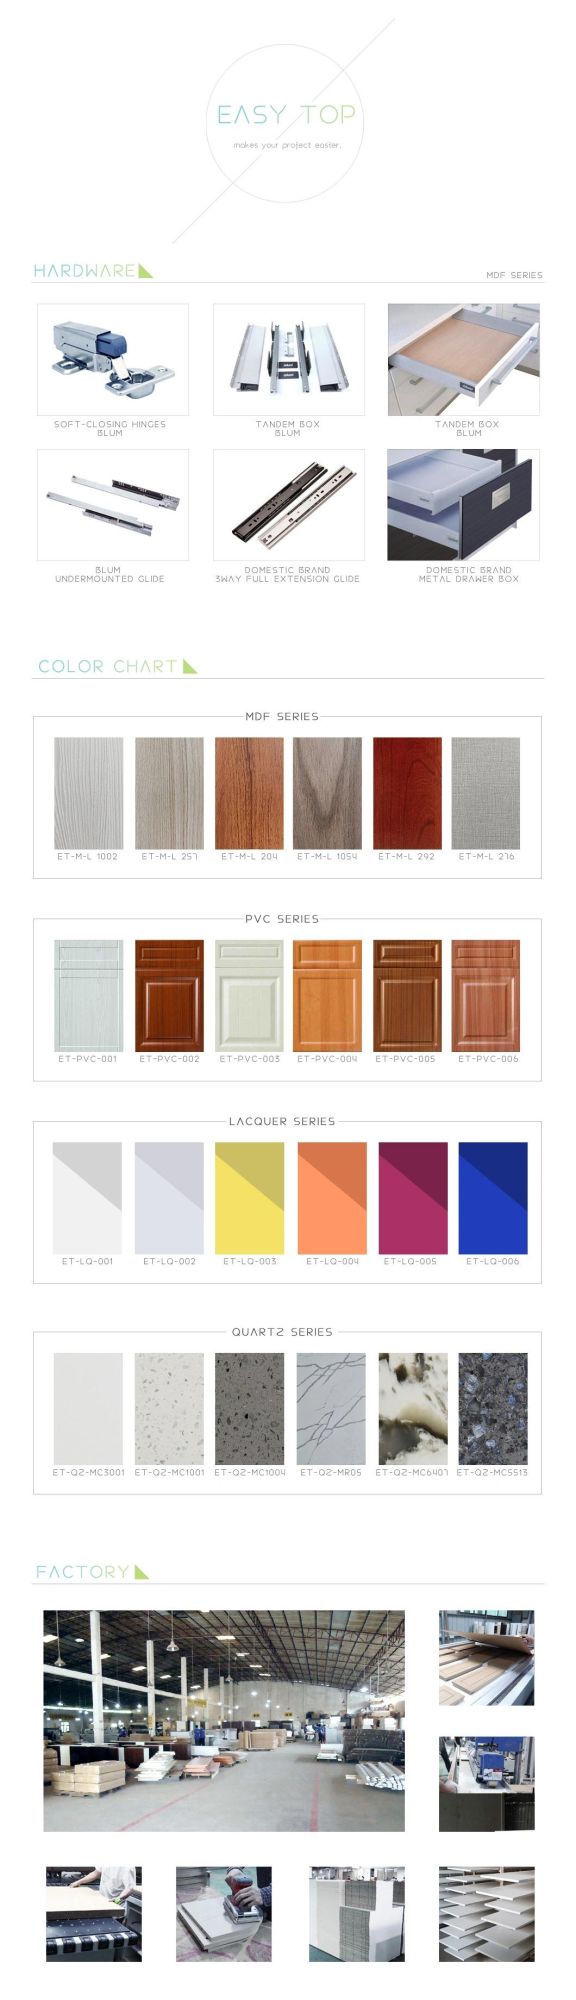 White Flat Joinery Design Slab Cupboard Wood Timber Color Kitchen Cabinets